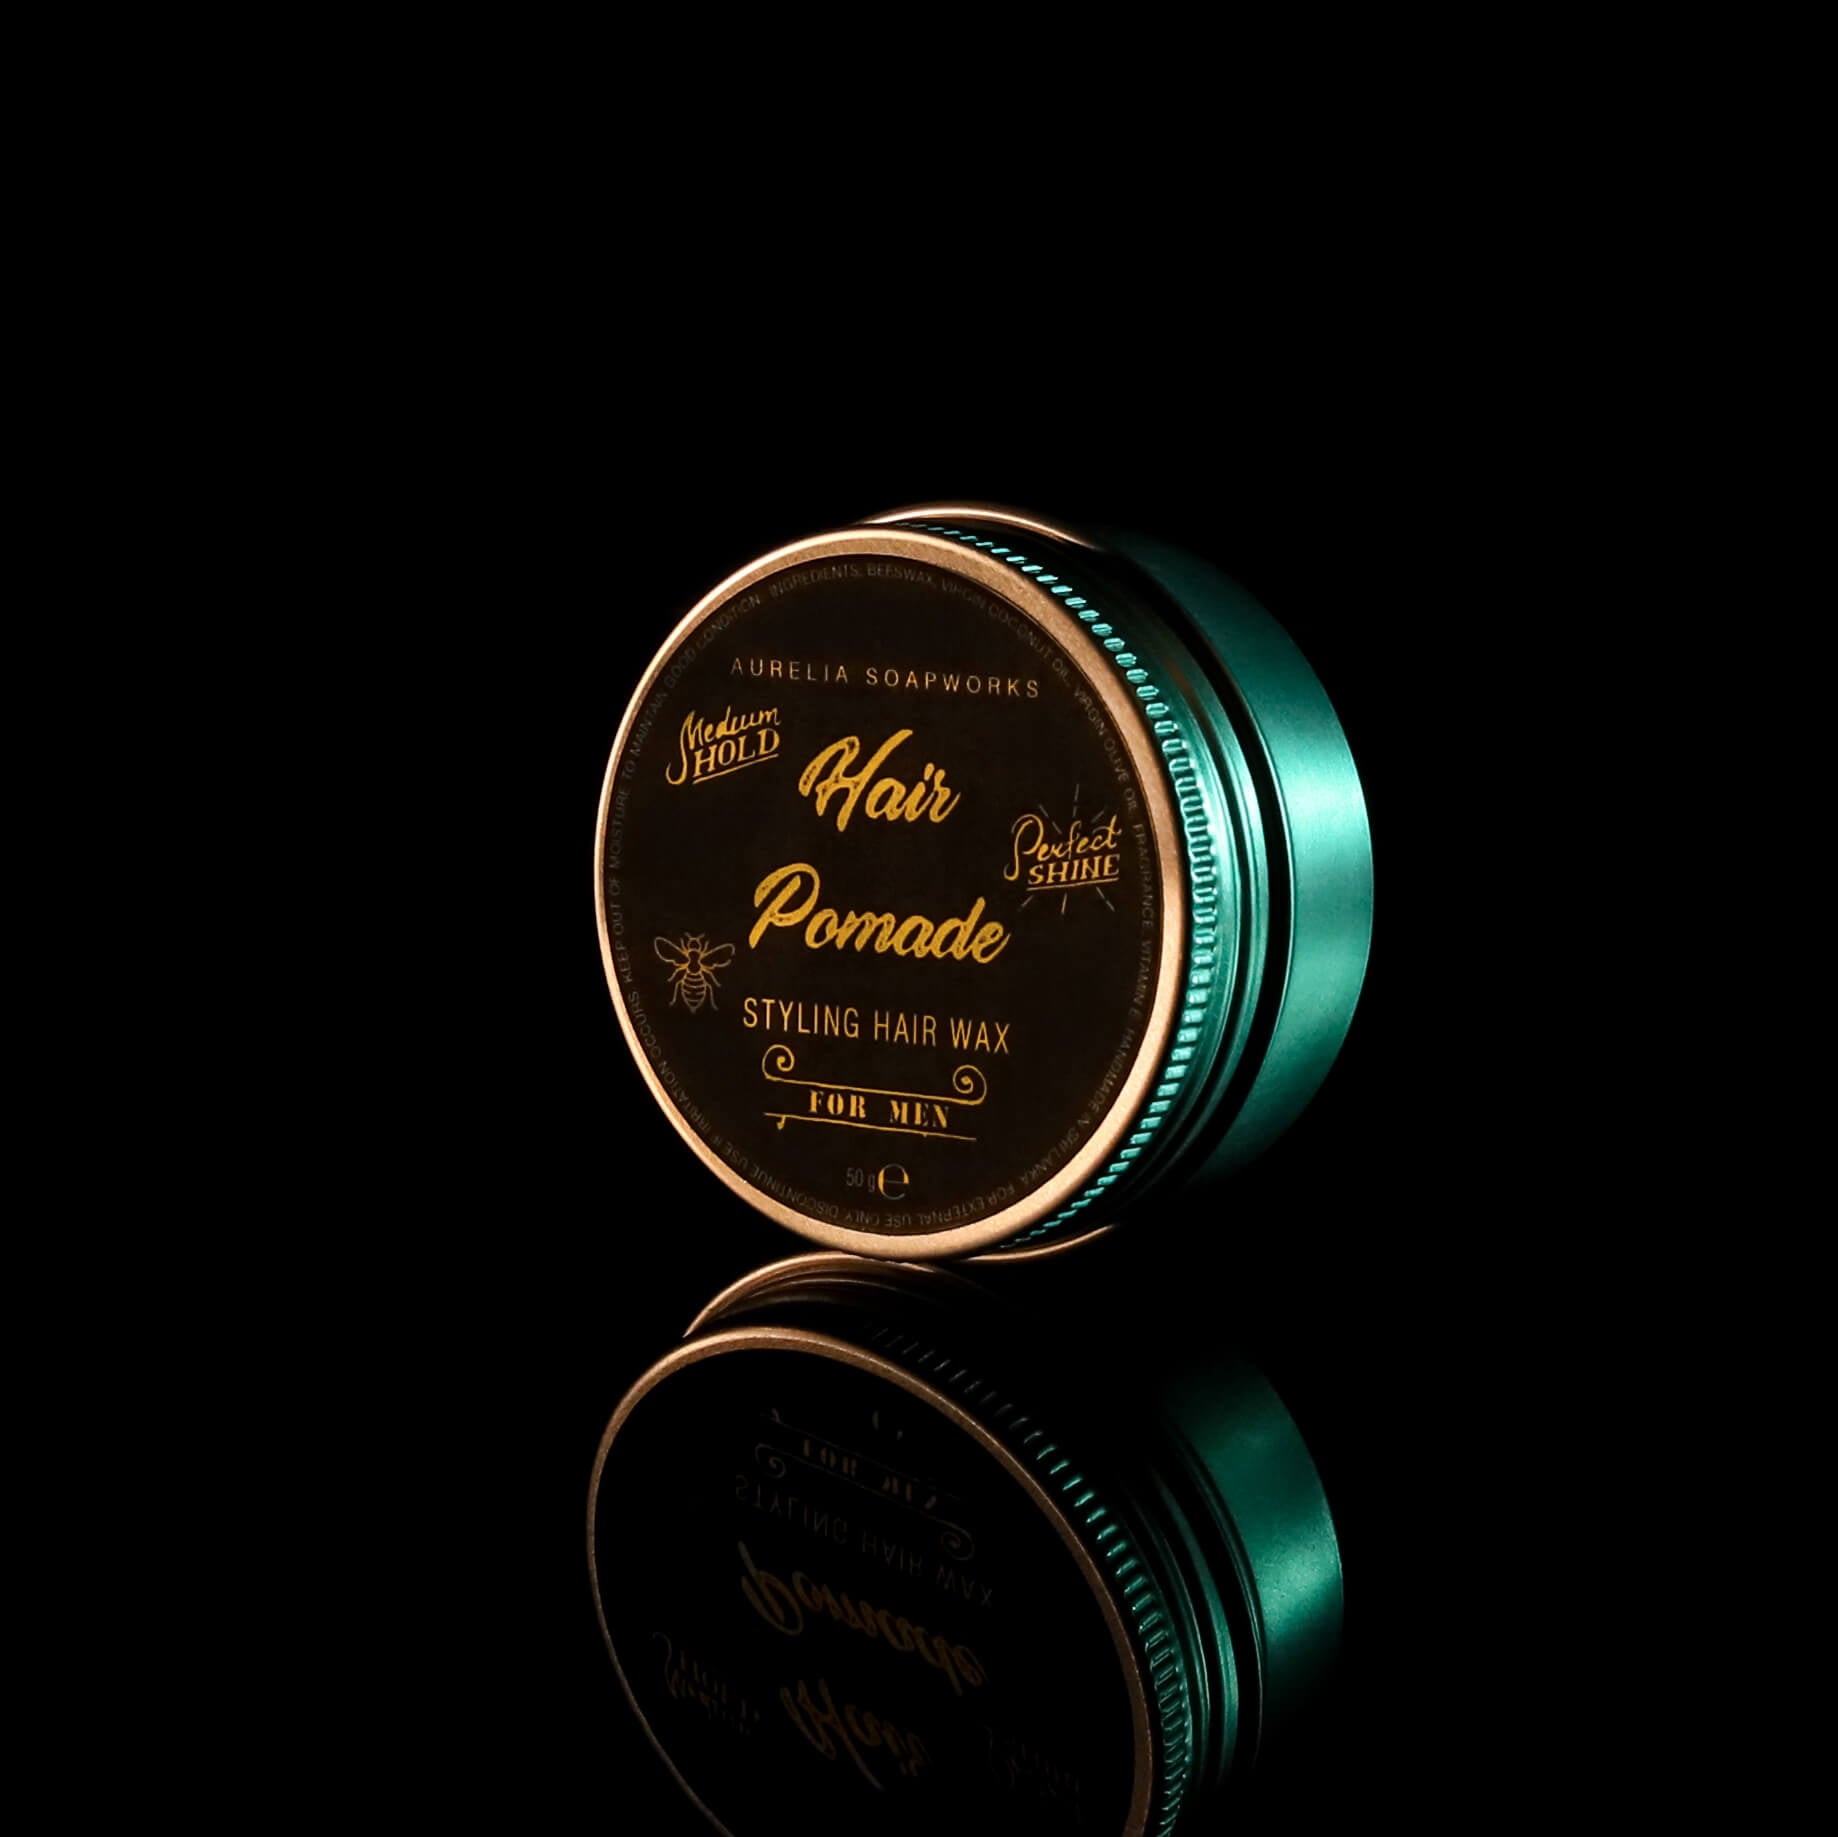 Hair styling pomade